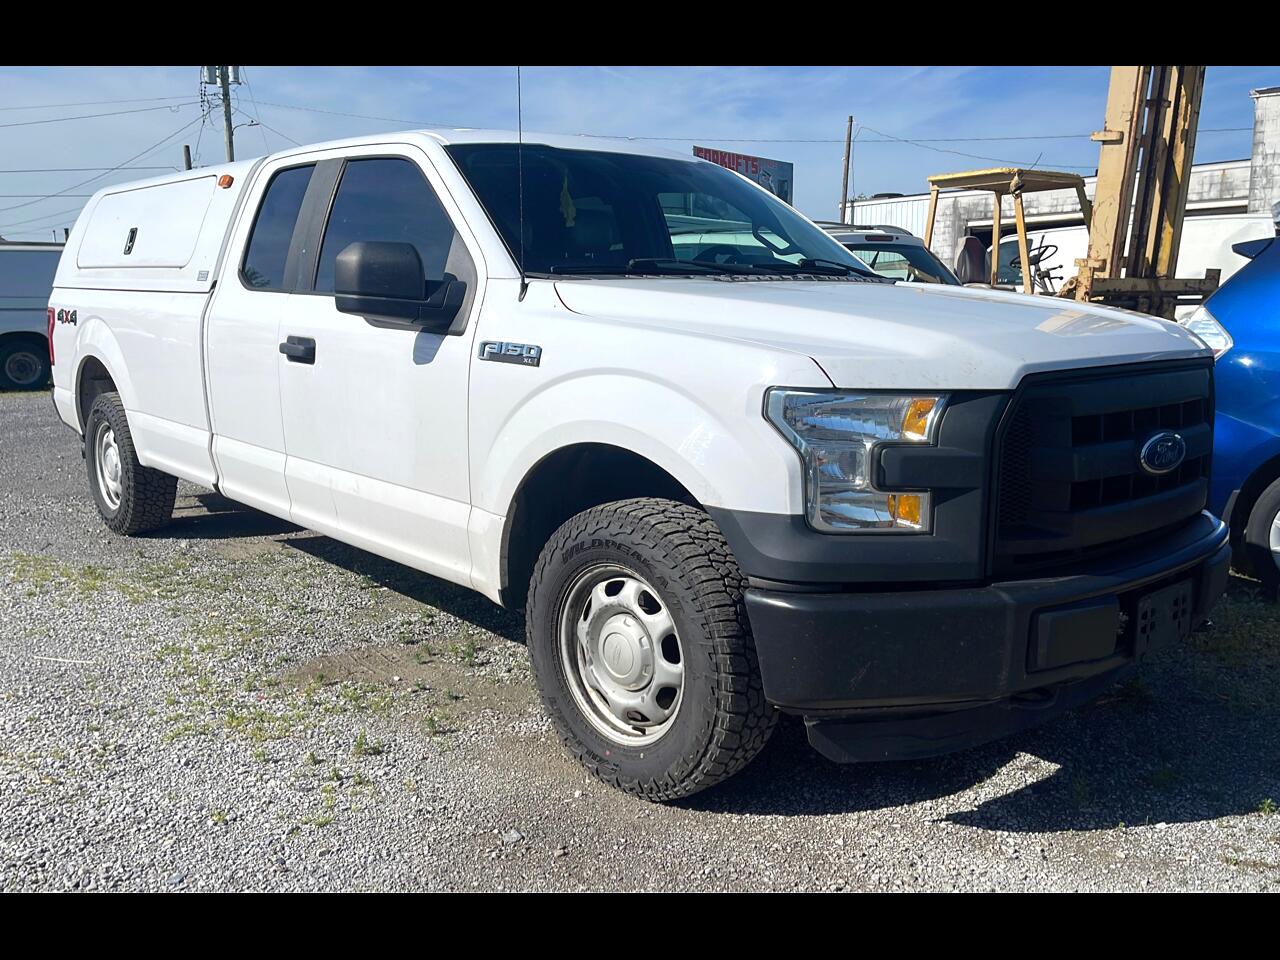 2016 Ford F-150 Lariat SuperCab 8-ft. 4WD